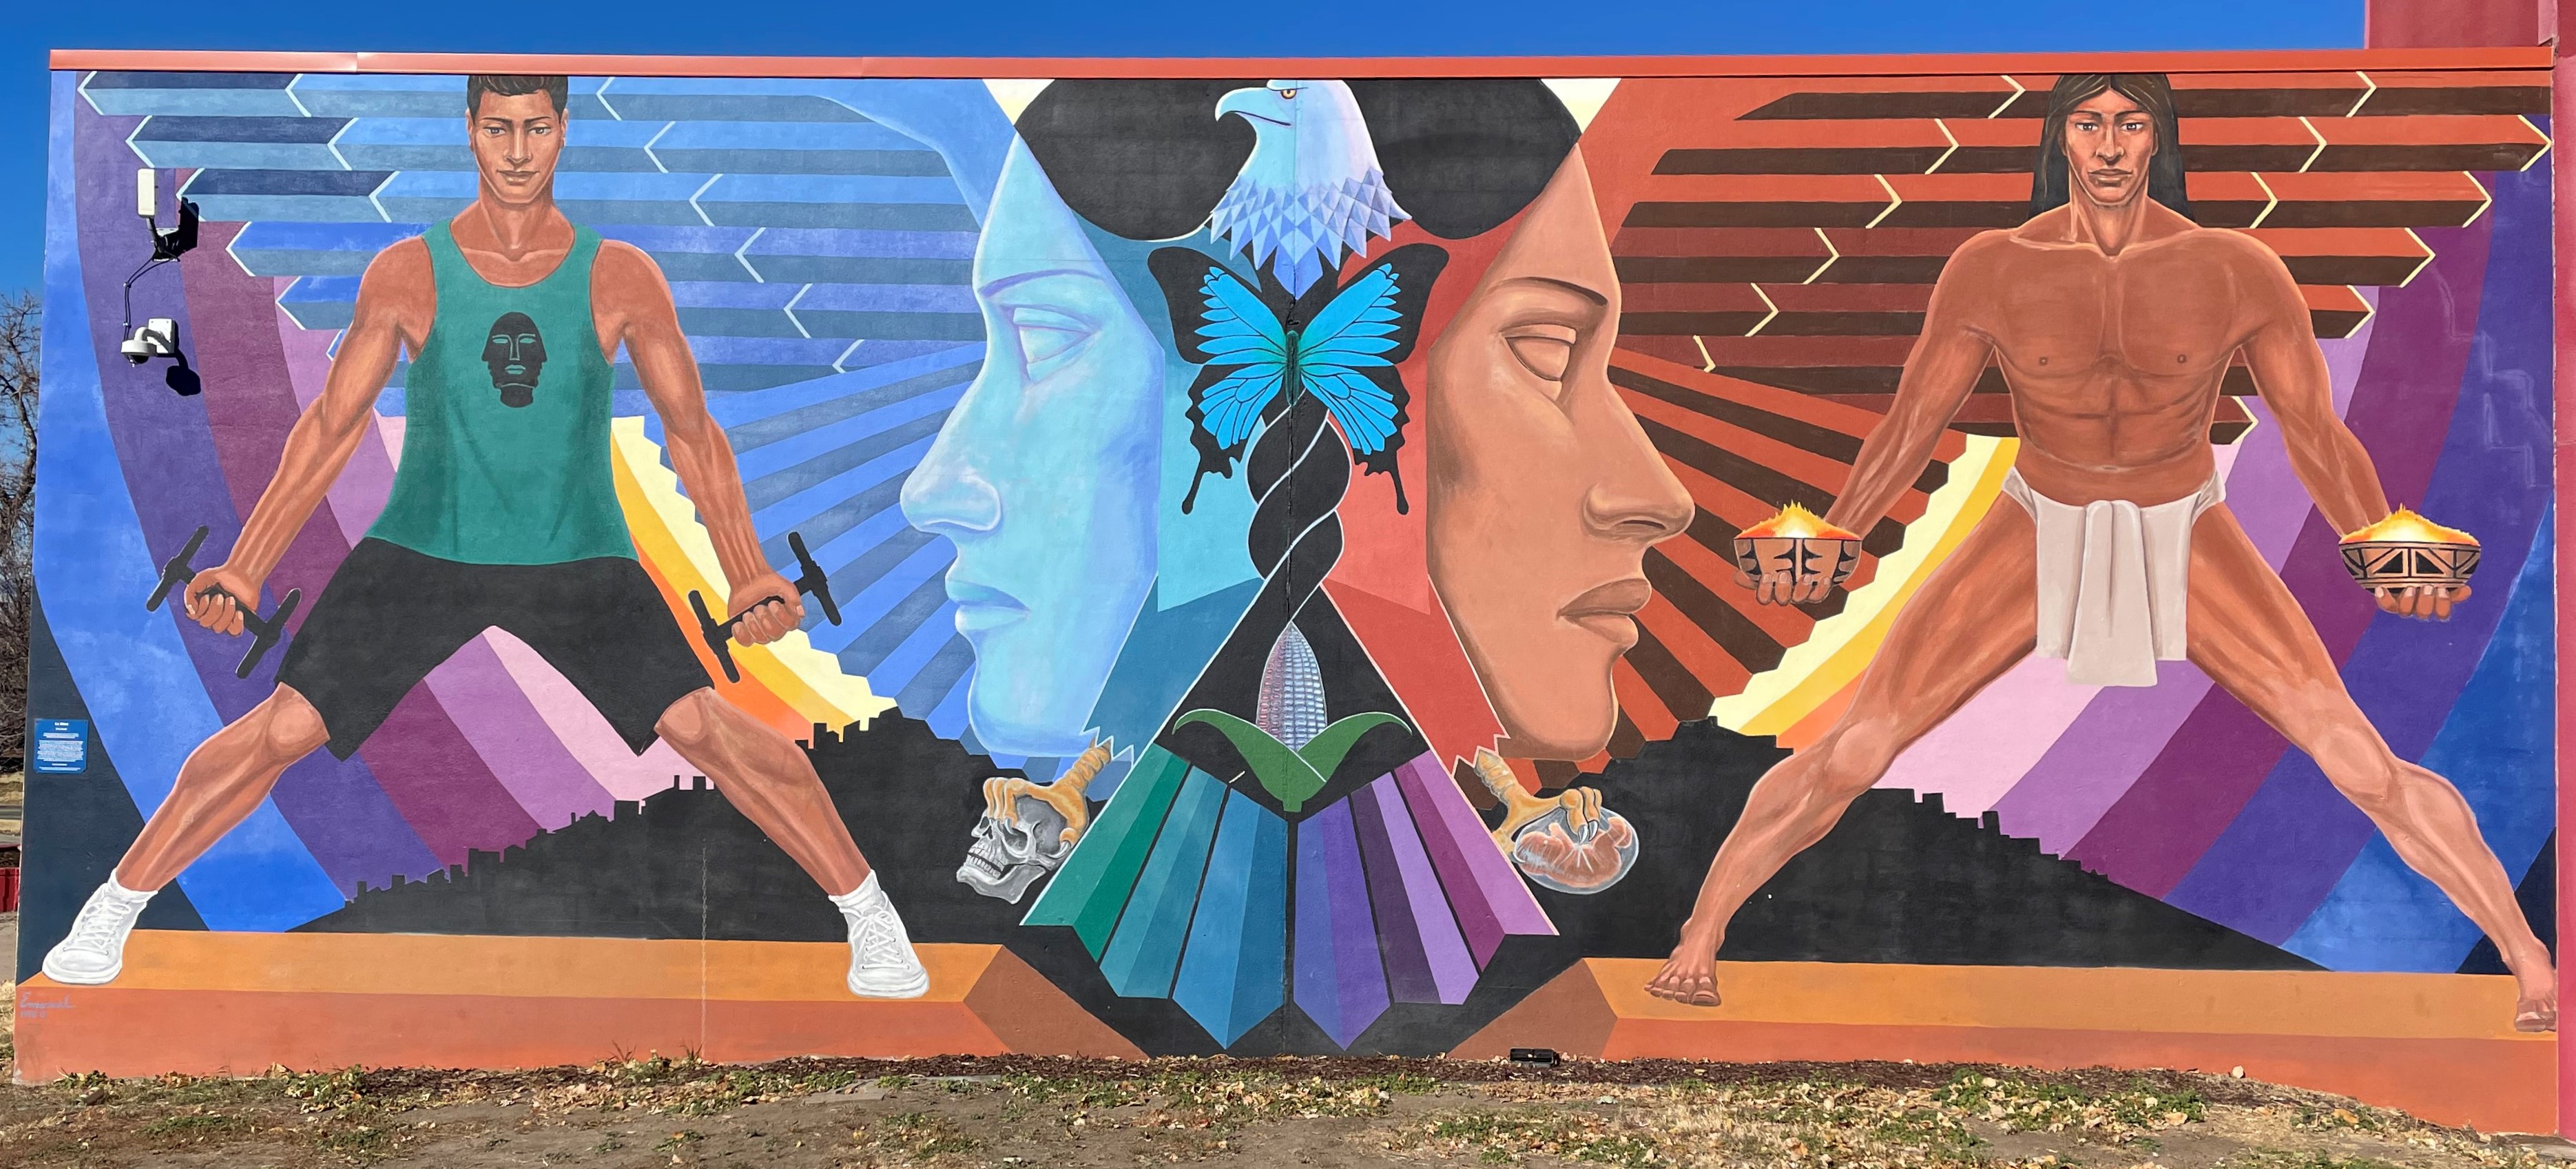 A colorful mural depicting an eagle whose wings form the faces of Chicana women. On one side is a modern chicano athlete, on the other side is an Indigenous person participating in a ritual.